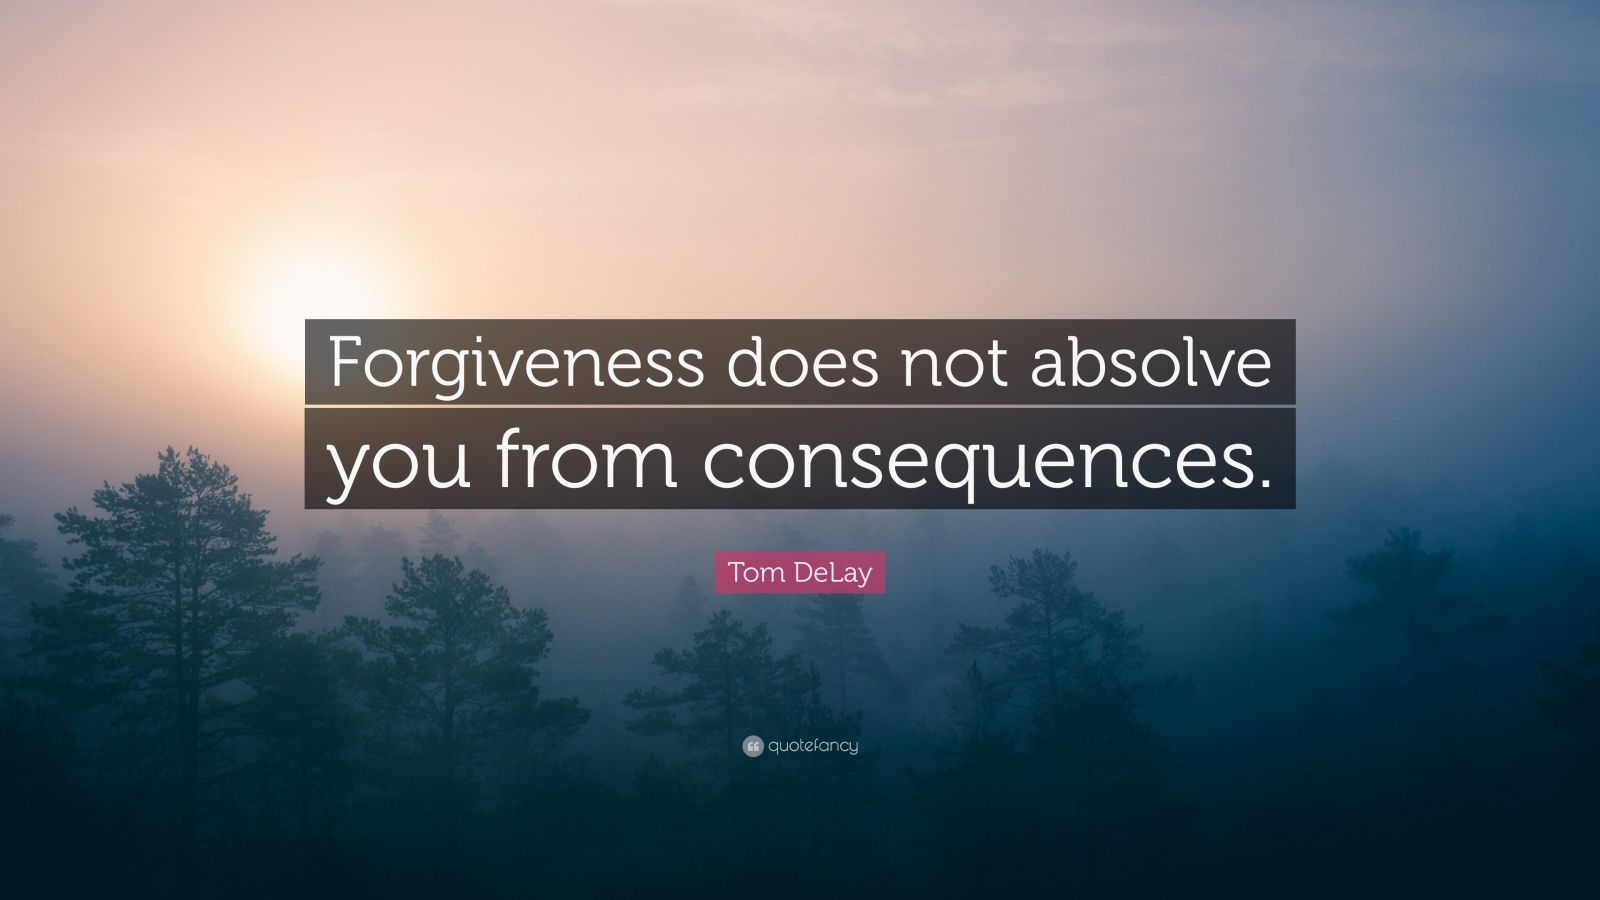 Tom DeLay Quote: “Forgiveness does not absolve you from consequences ...